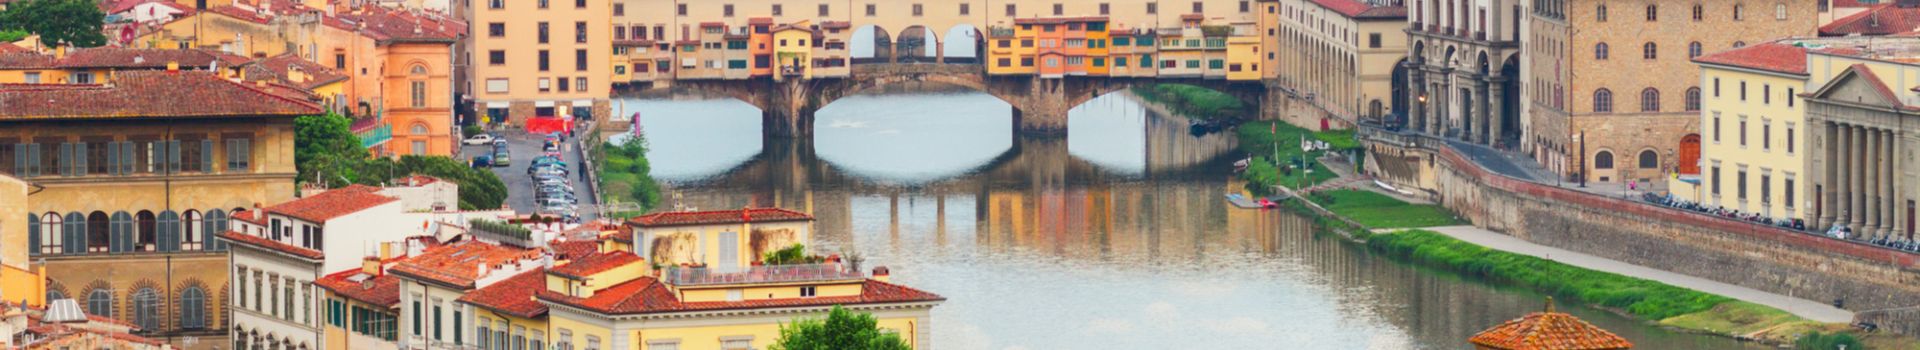 Cheap city breaks to Florence with Cassidy Travel